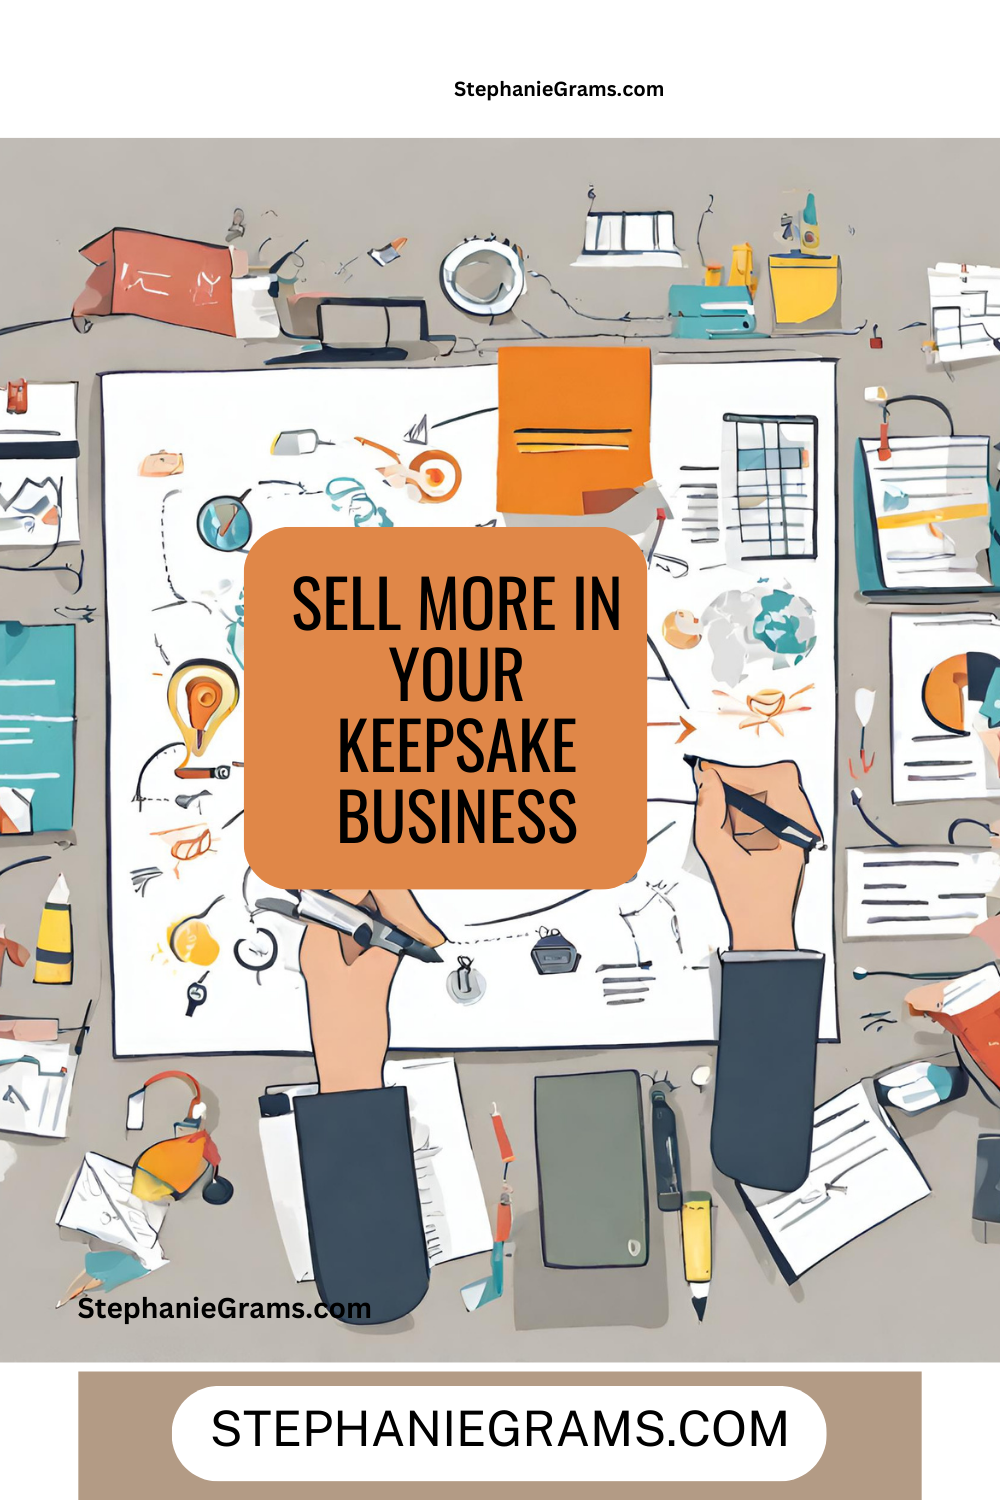 Keepsake Workshops for Connecting with Your Community